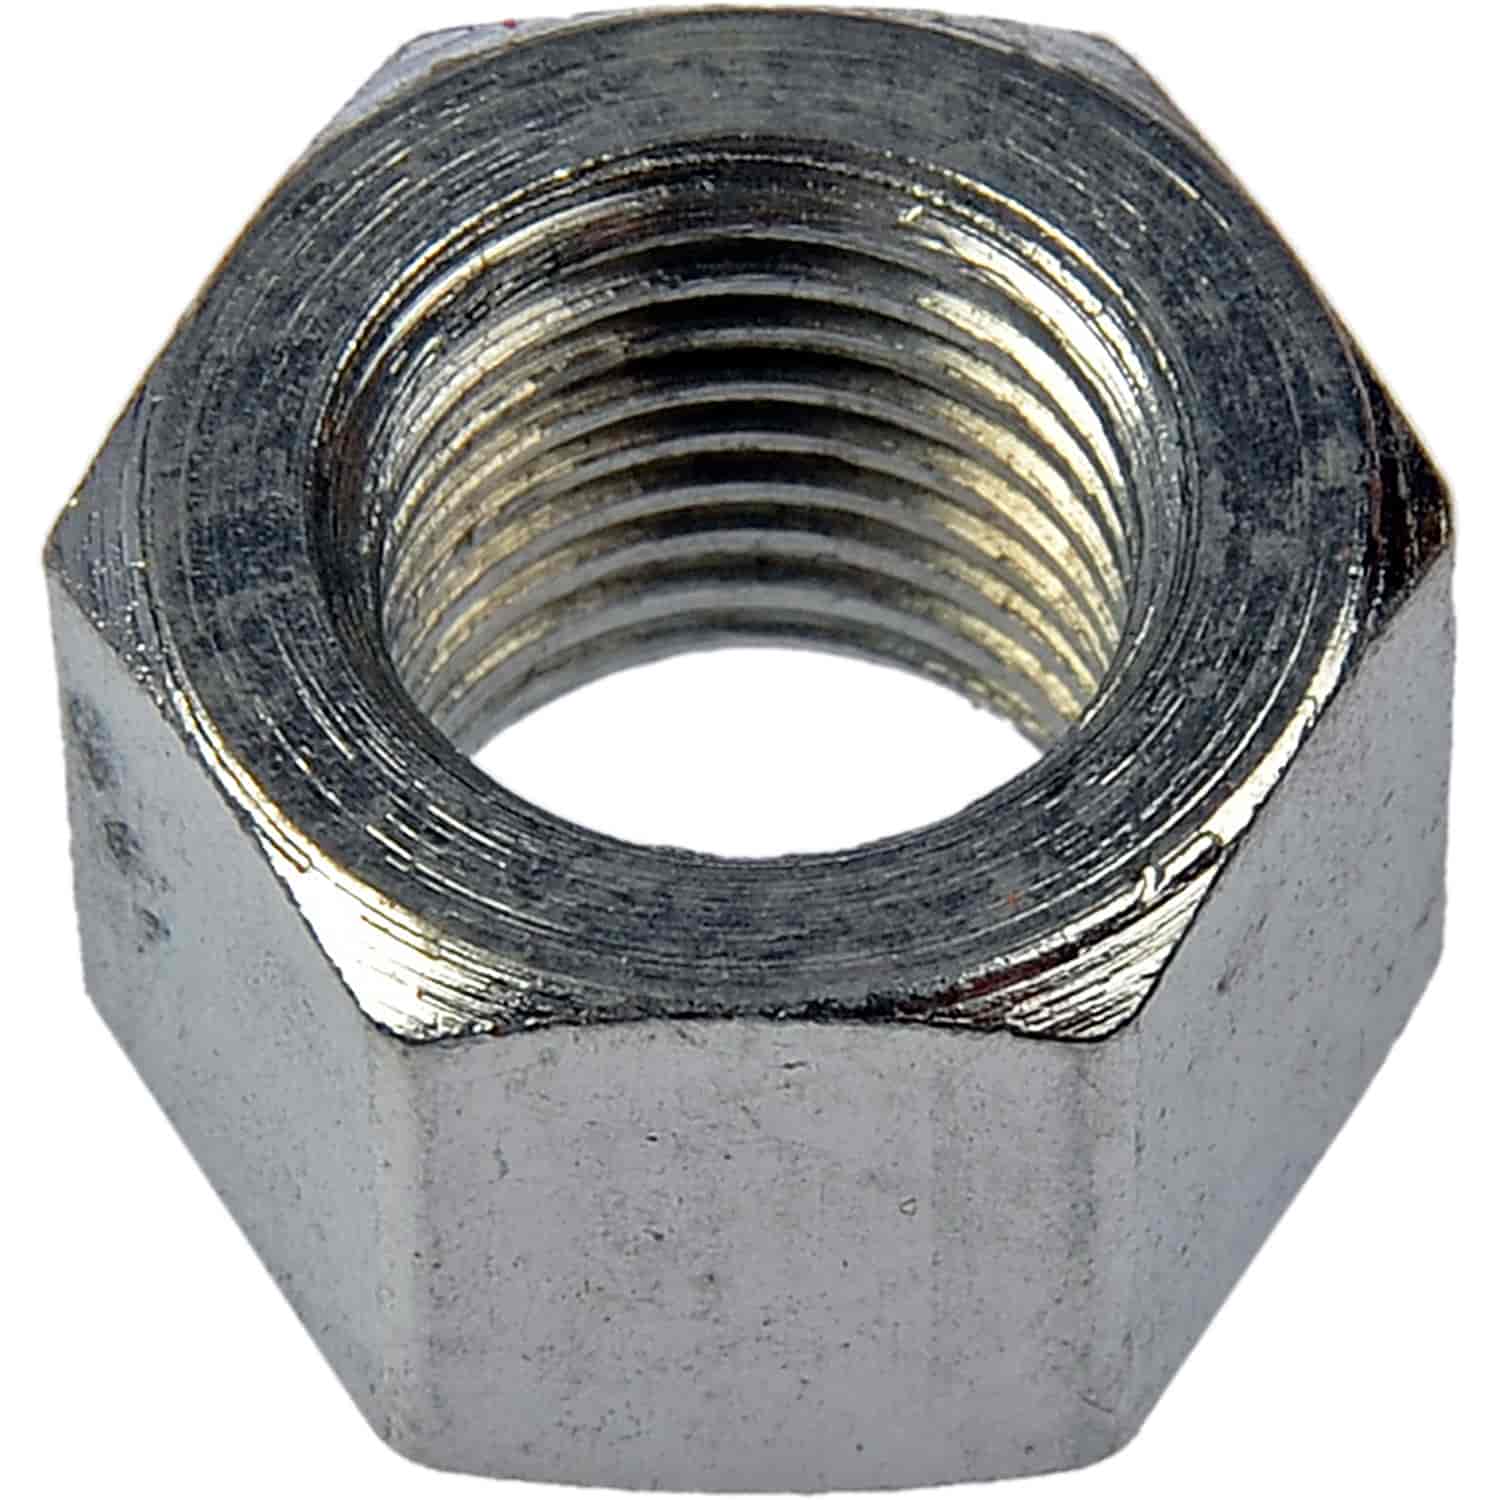 635-002 Connecting Rod Nuts - Type 2 [3/8-24